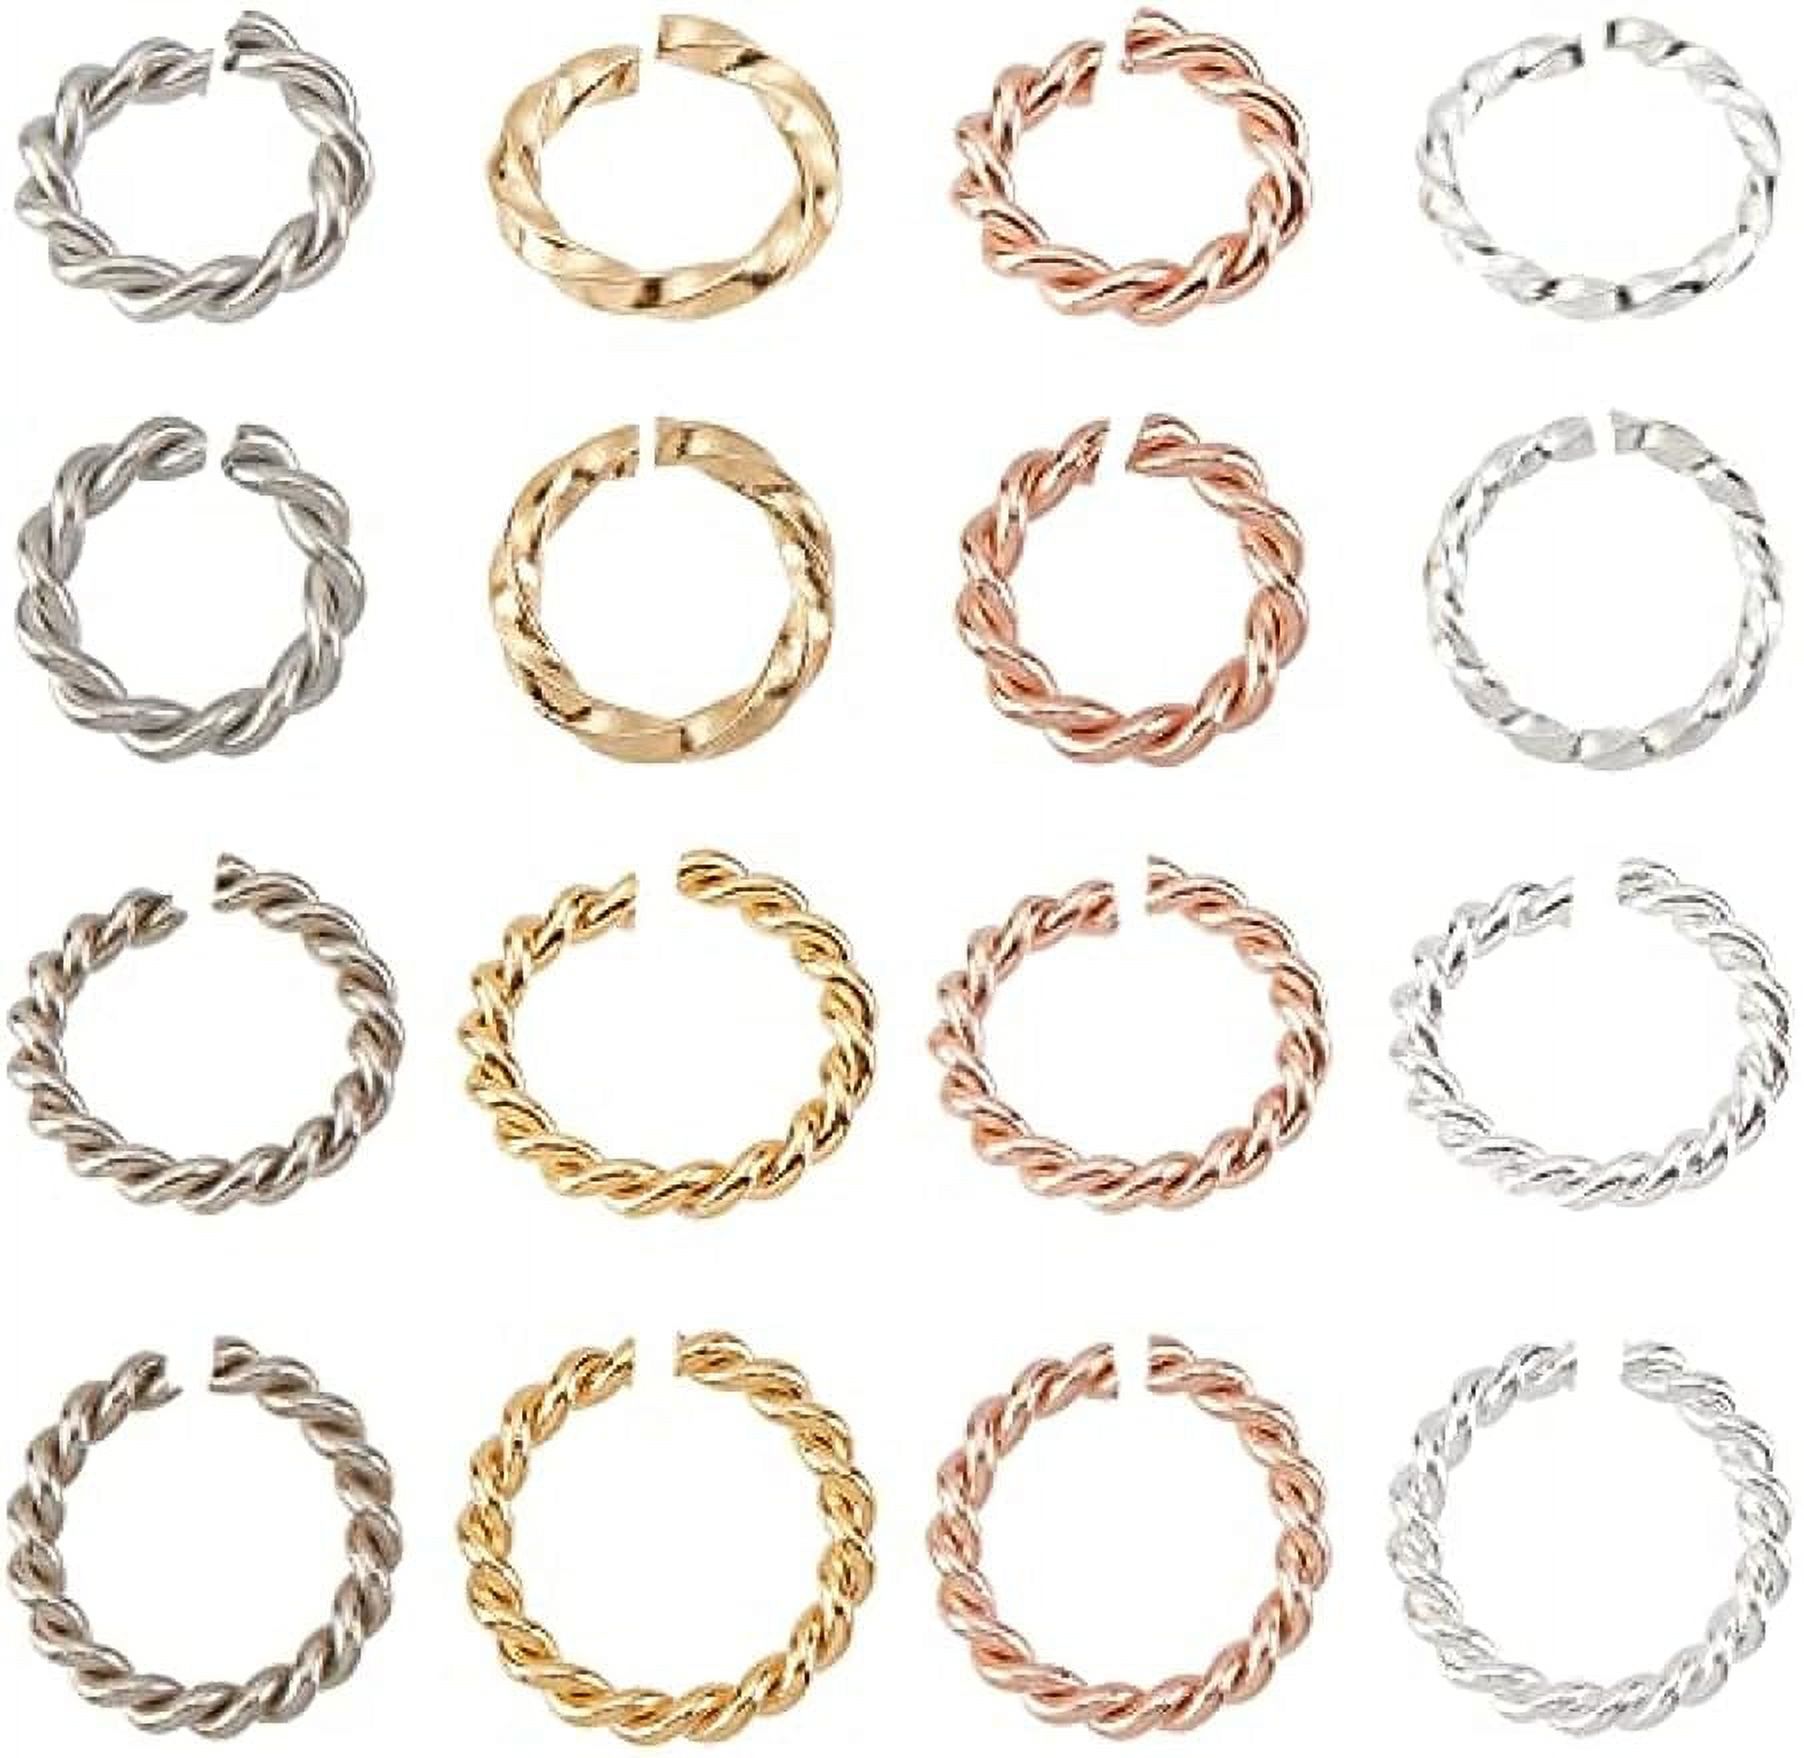 64pcs 2 Sizes 5mm/7mm 4 Colors Twisted Jewelry Connecting Rings Stainless  Steel Open Jump Rings Circle Chainmaille Rings for Jewelry Making 